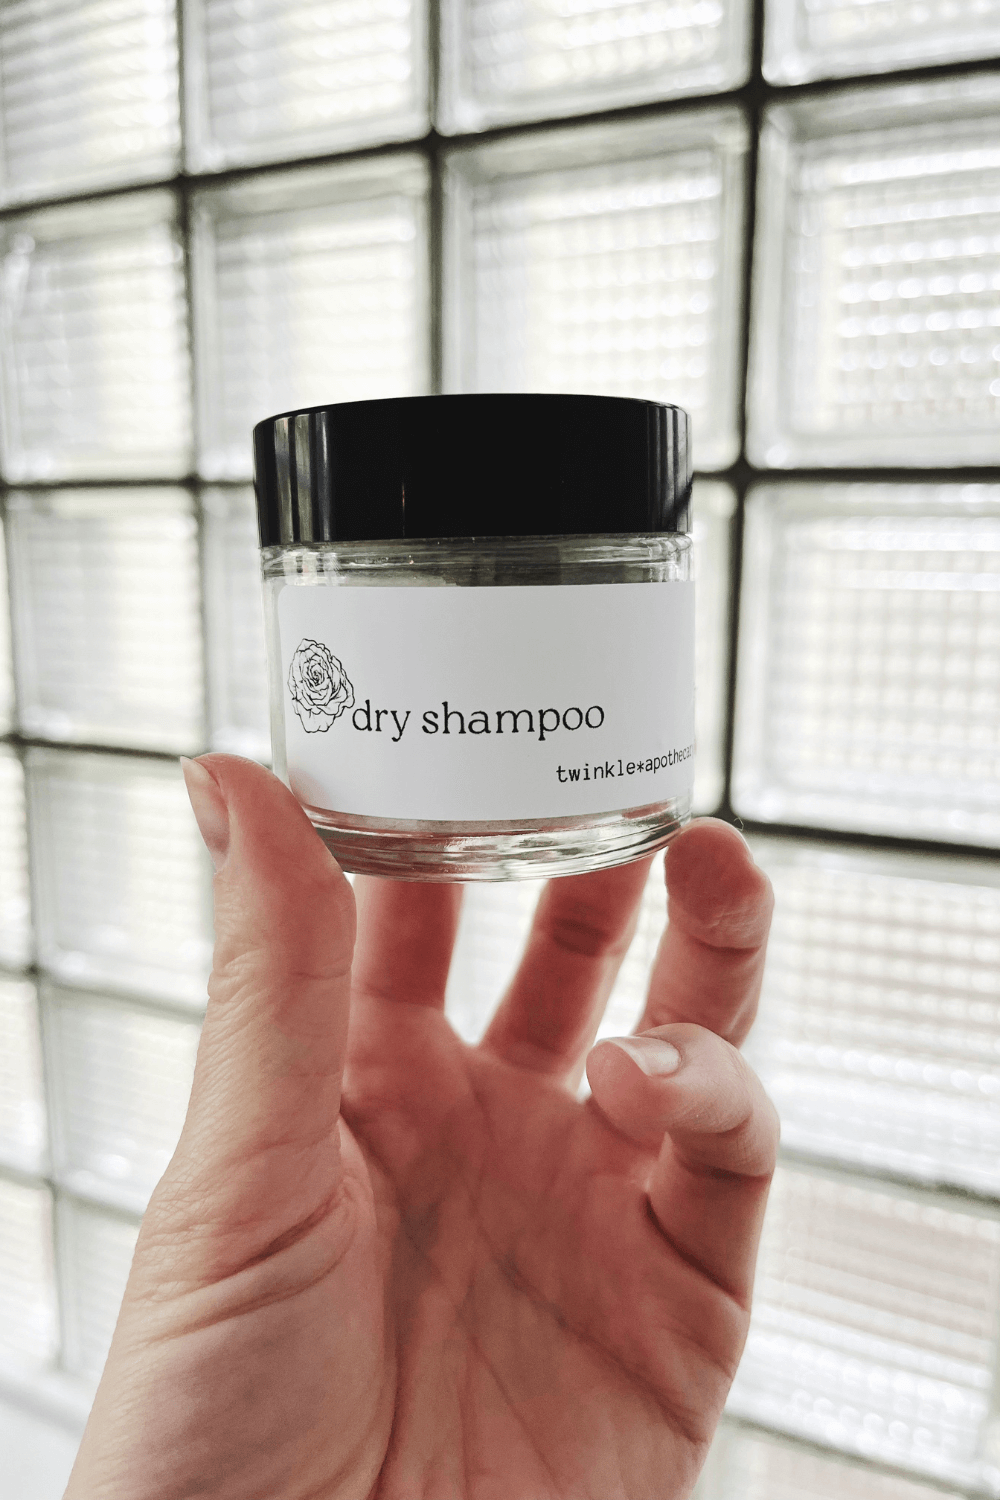 twinkle apothecary natural dry shampoo in a refillable glass jar